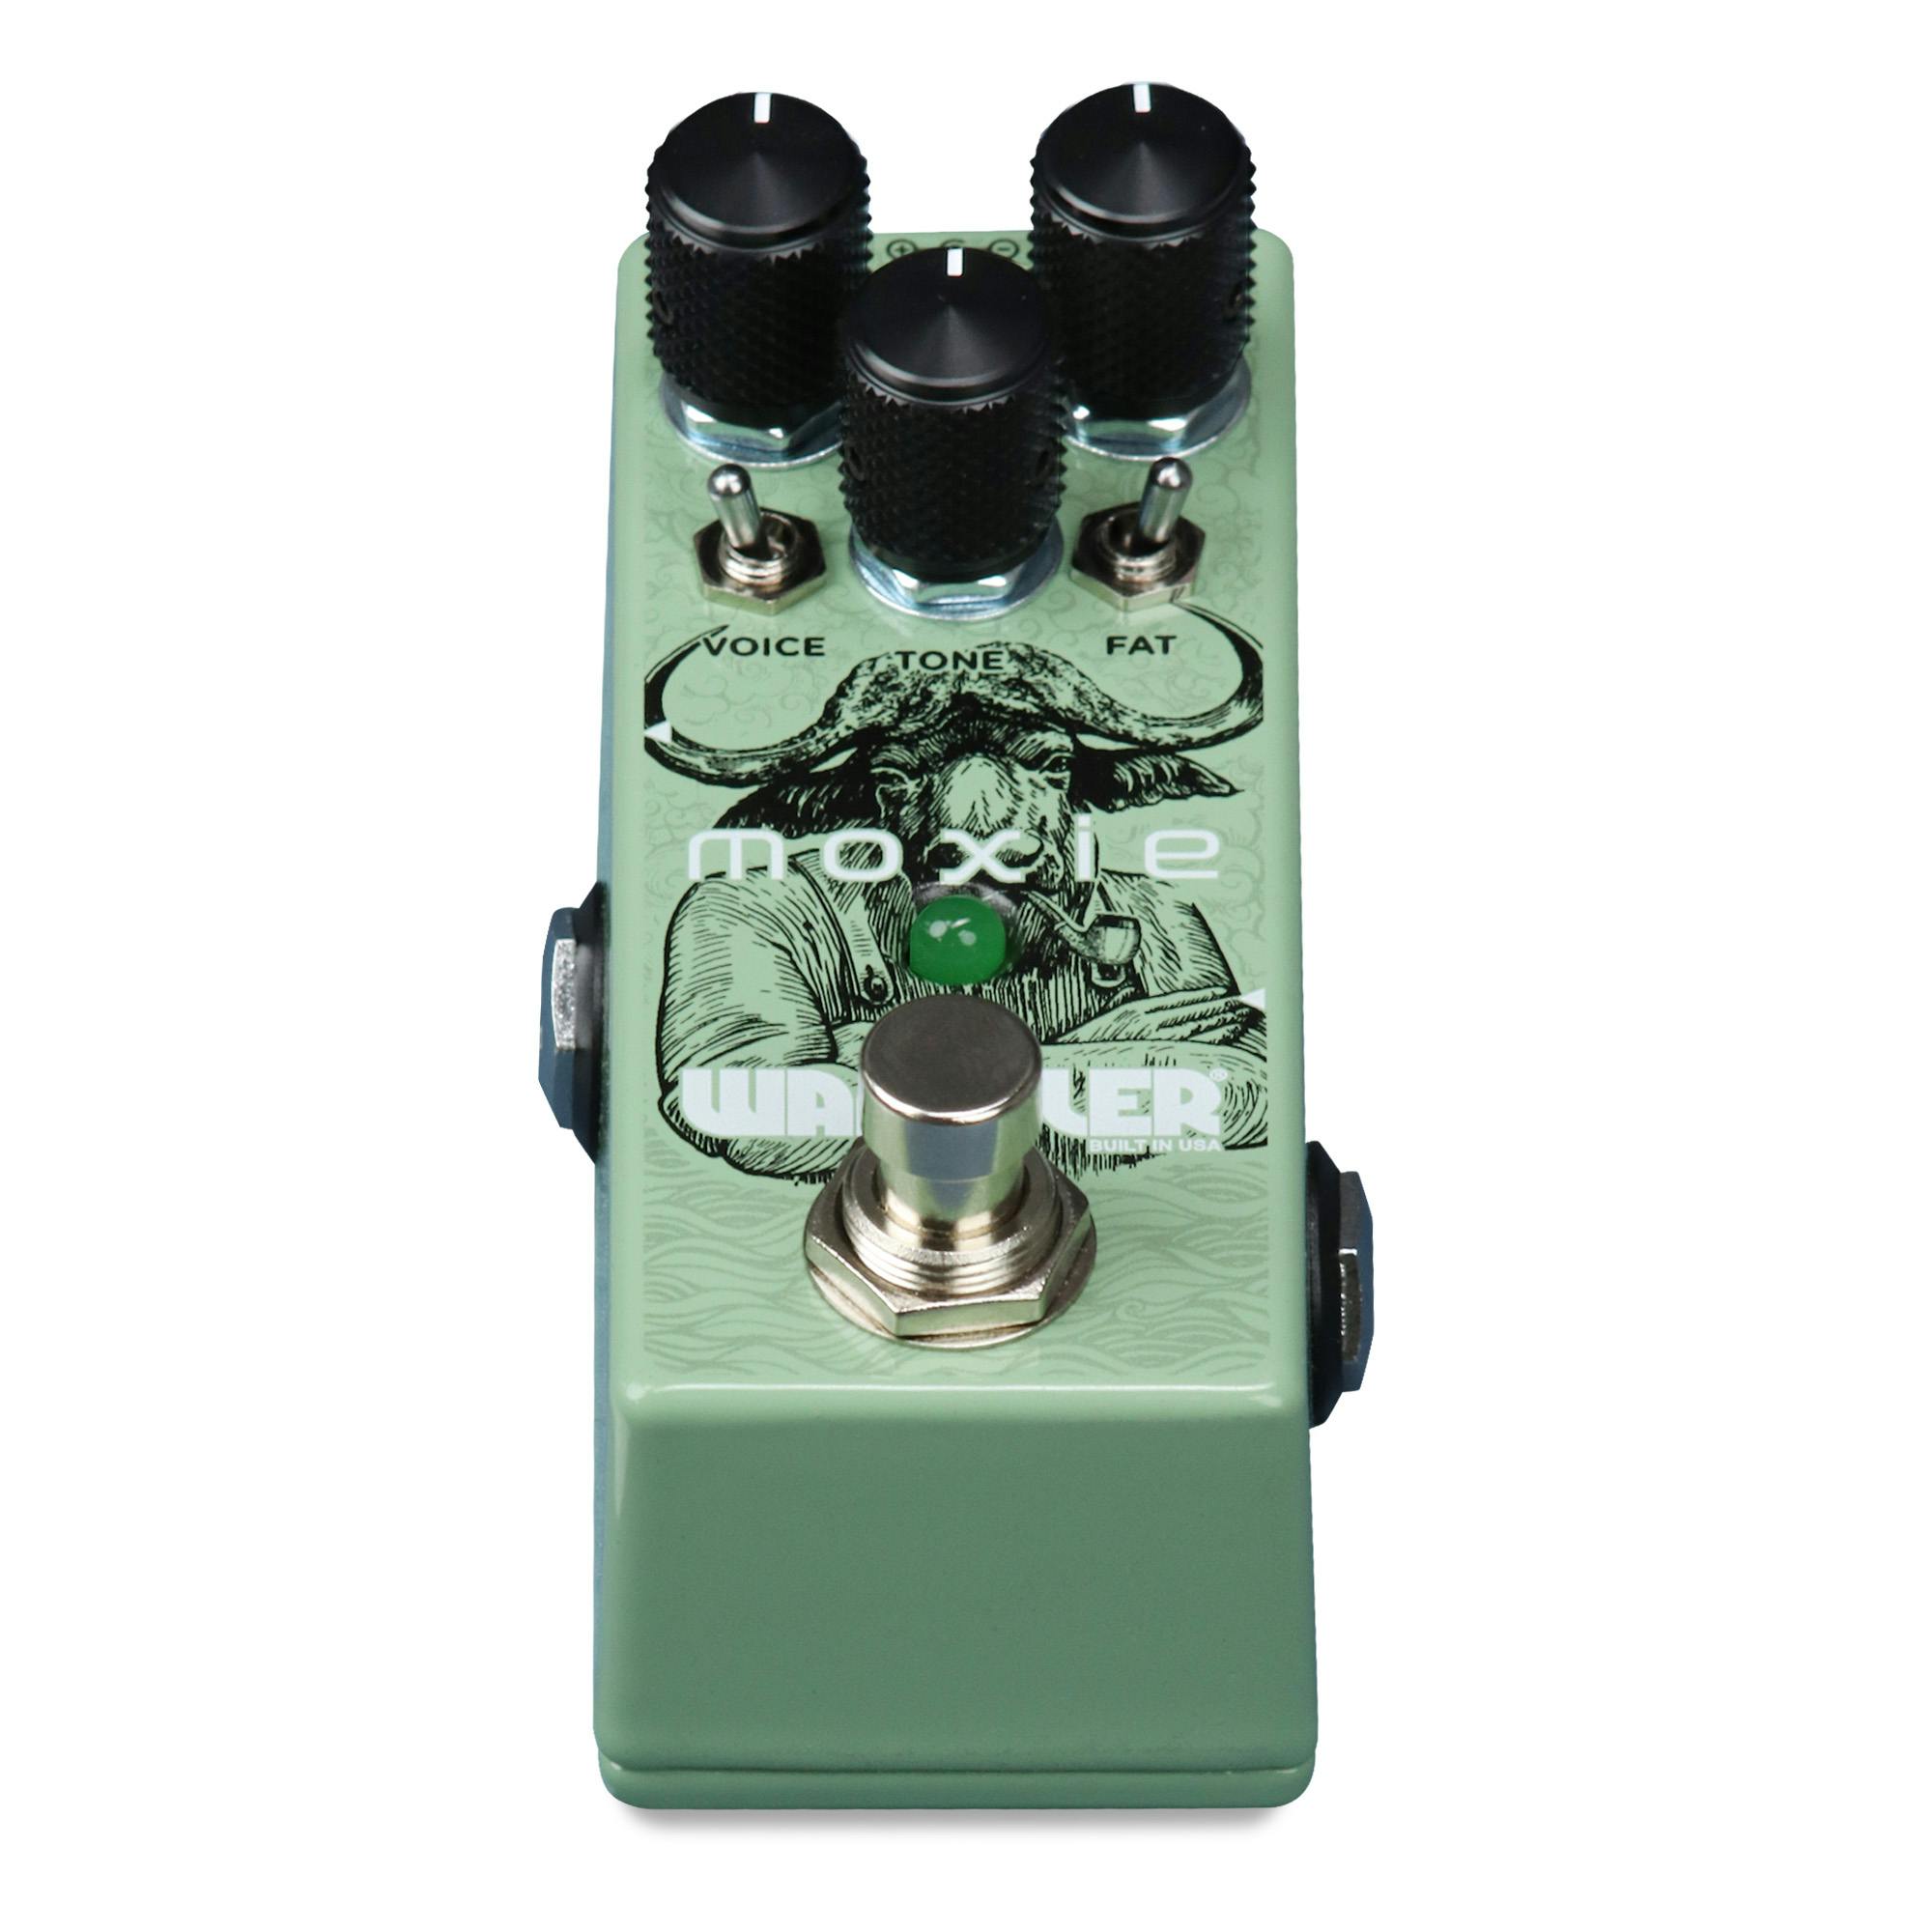 Wampler Moxie Overdrive Pedal - Andertons Music Co.